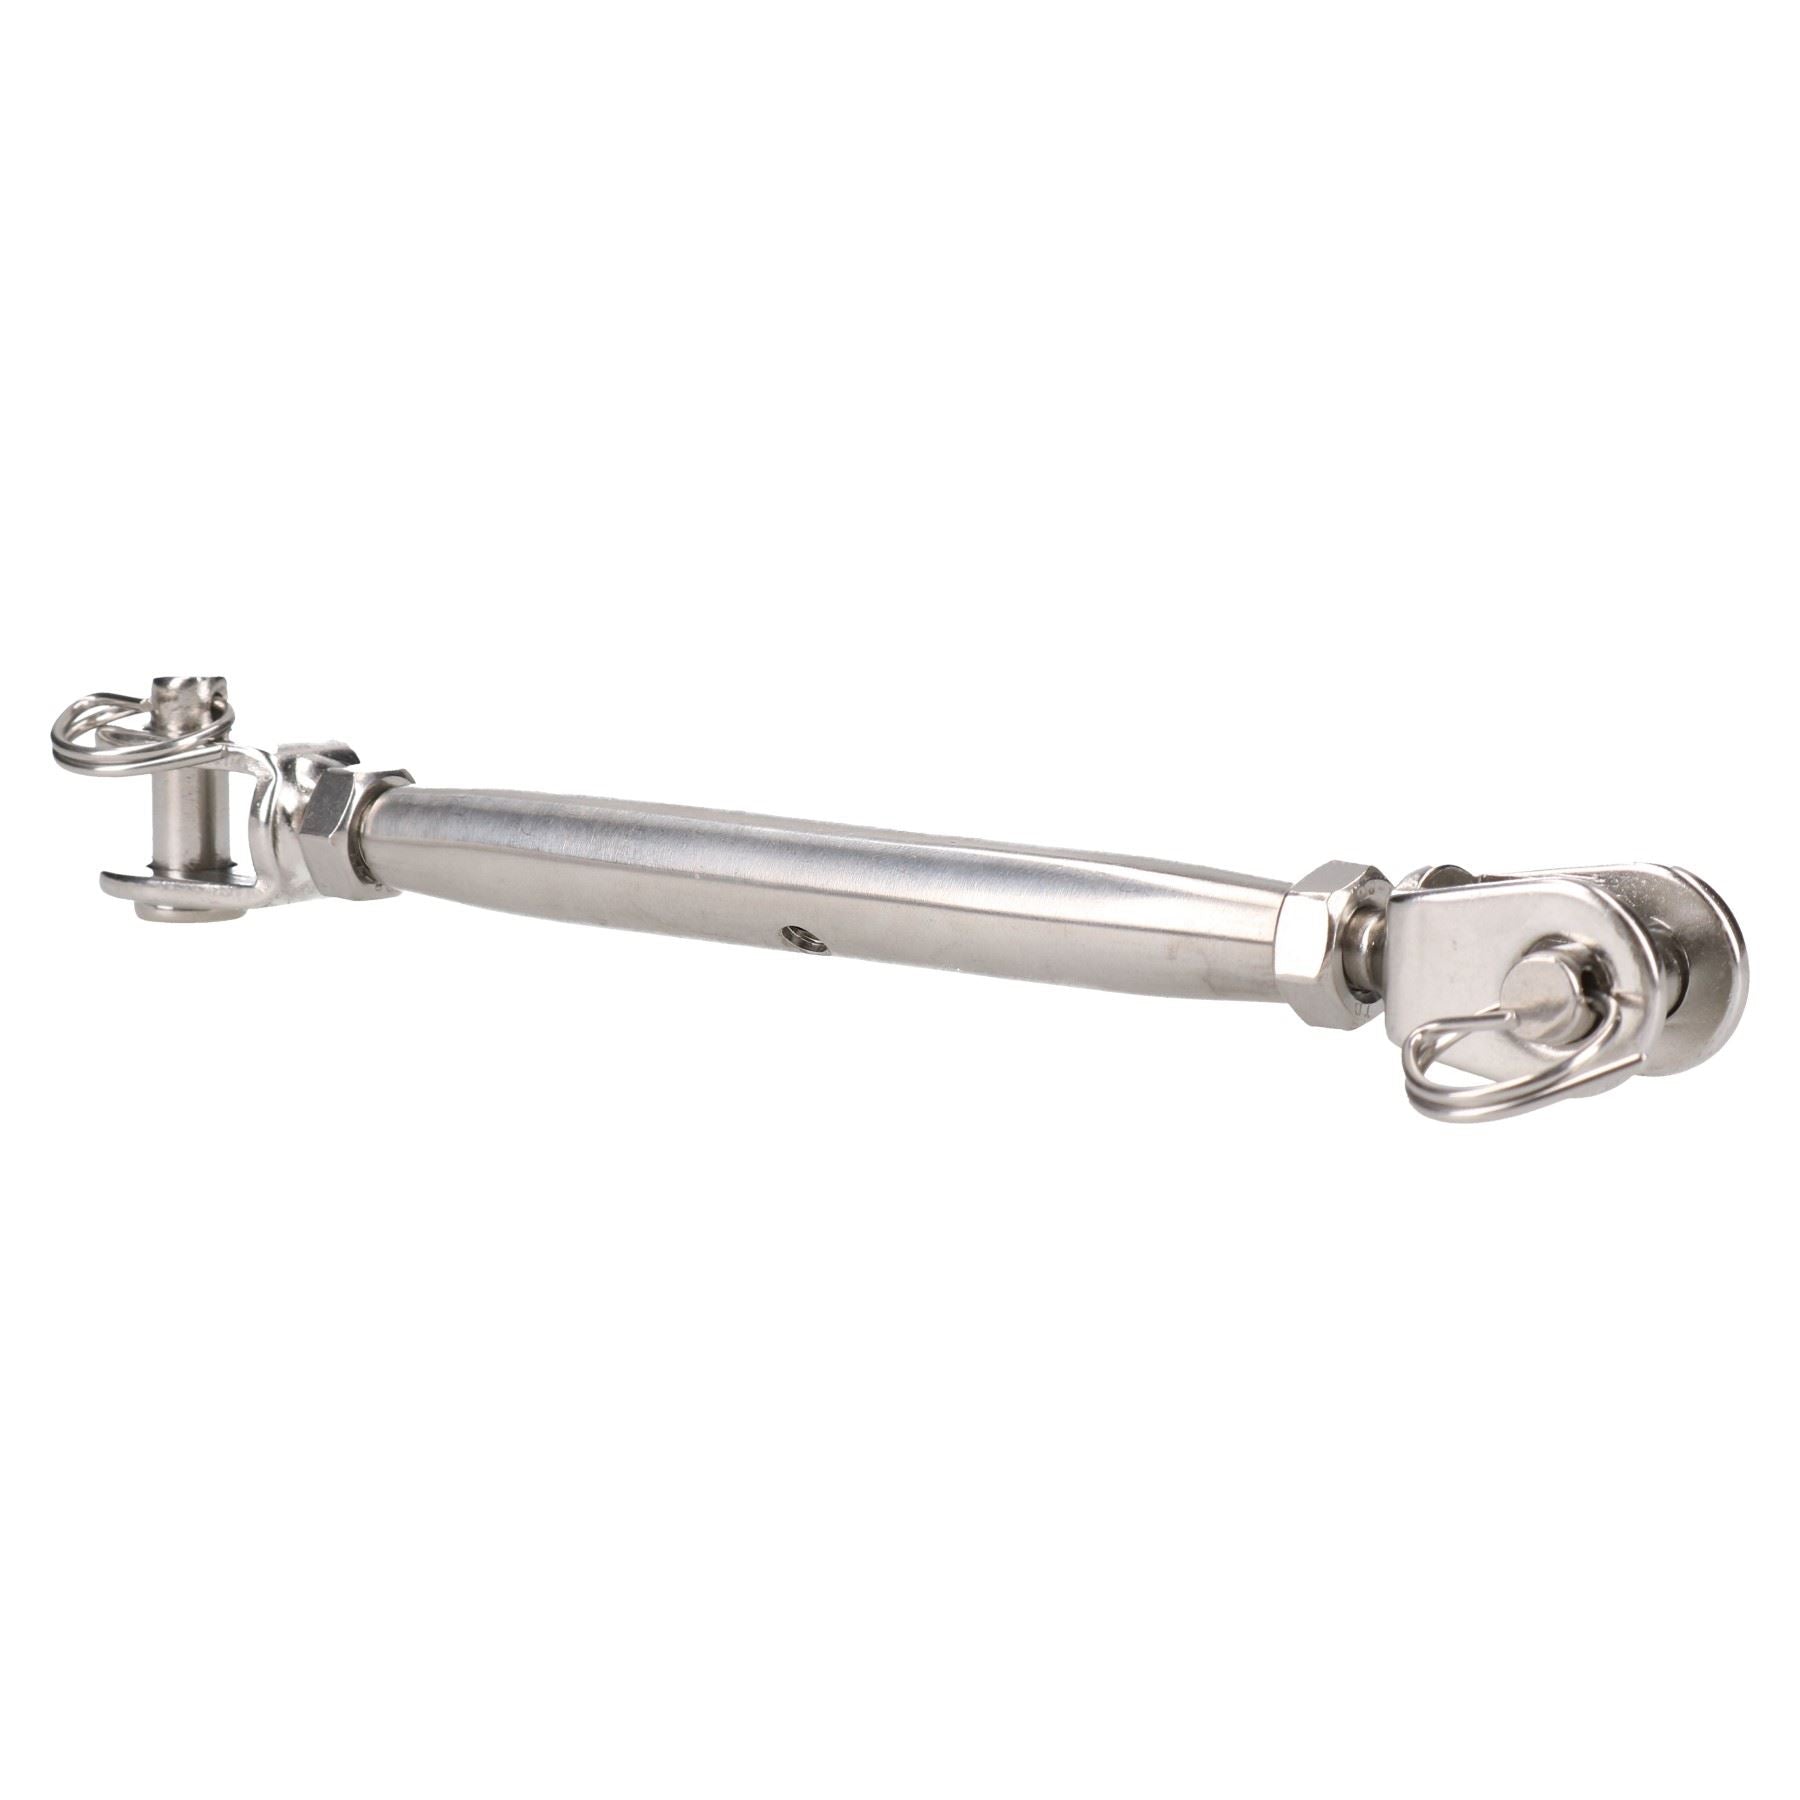 Rigging Screw 8mm Jaw to Jaw Turnbuckle Straining Marine Grade 316 Stainless